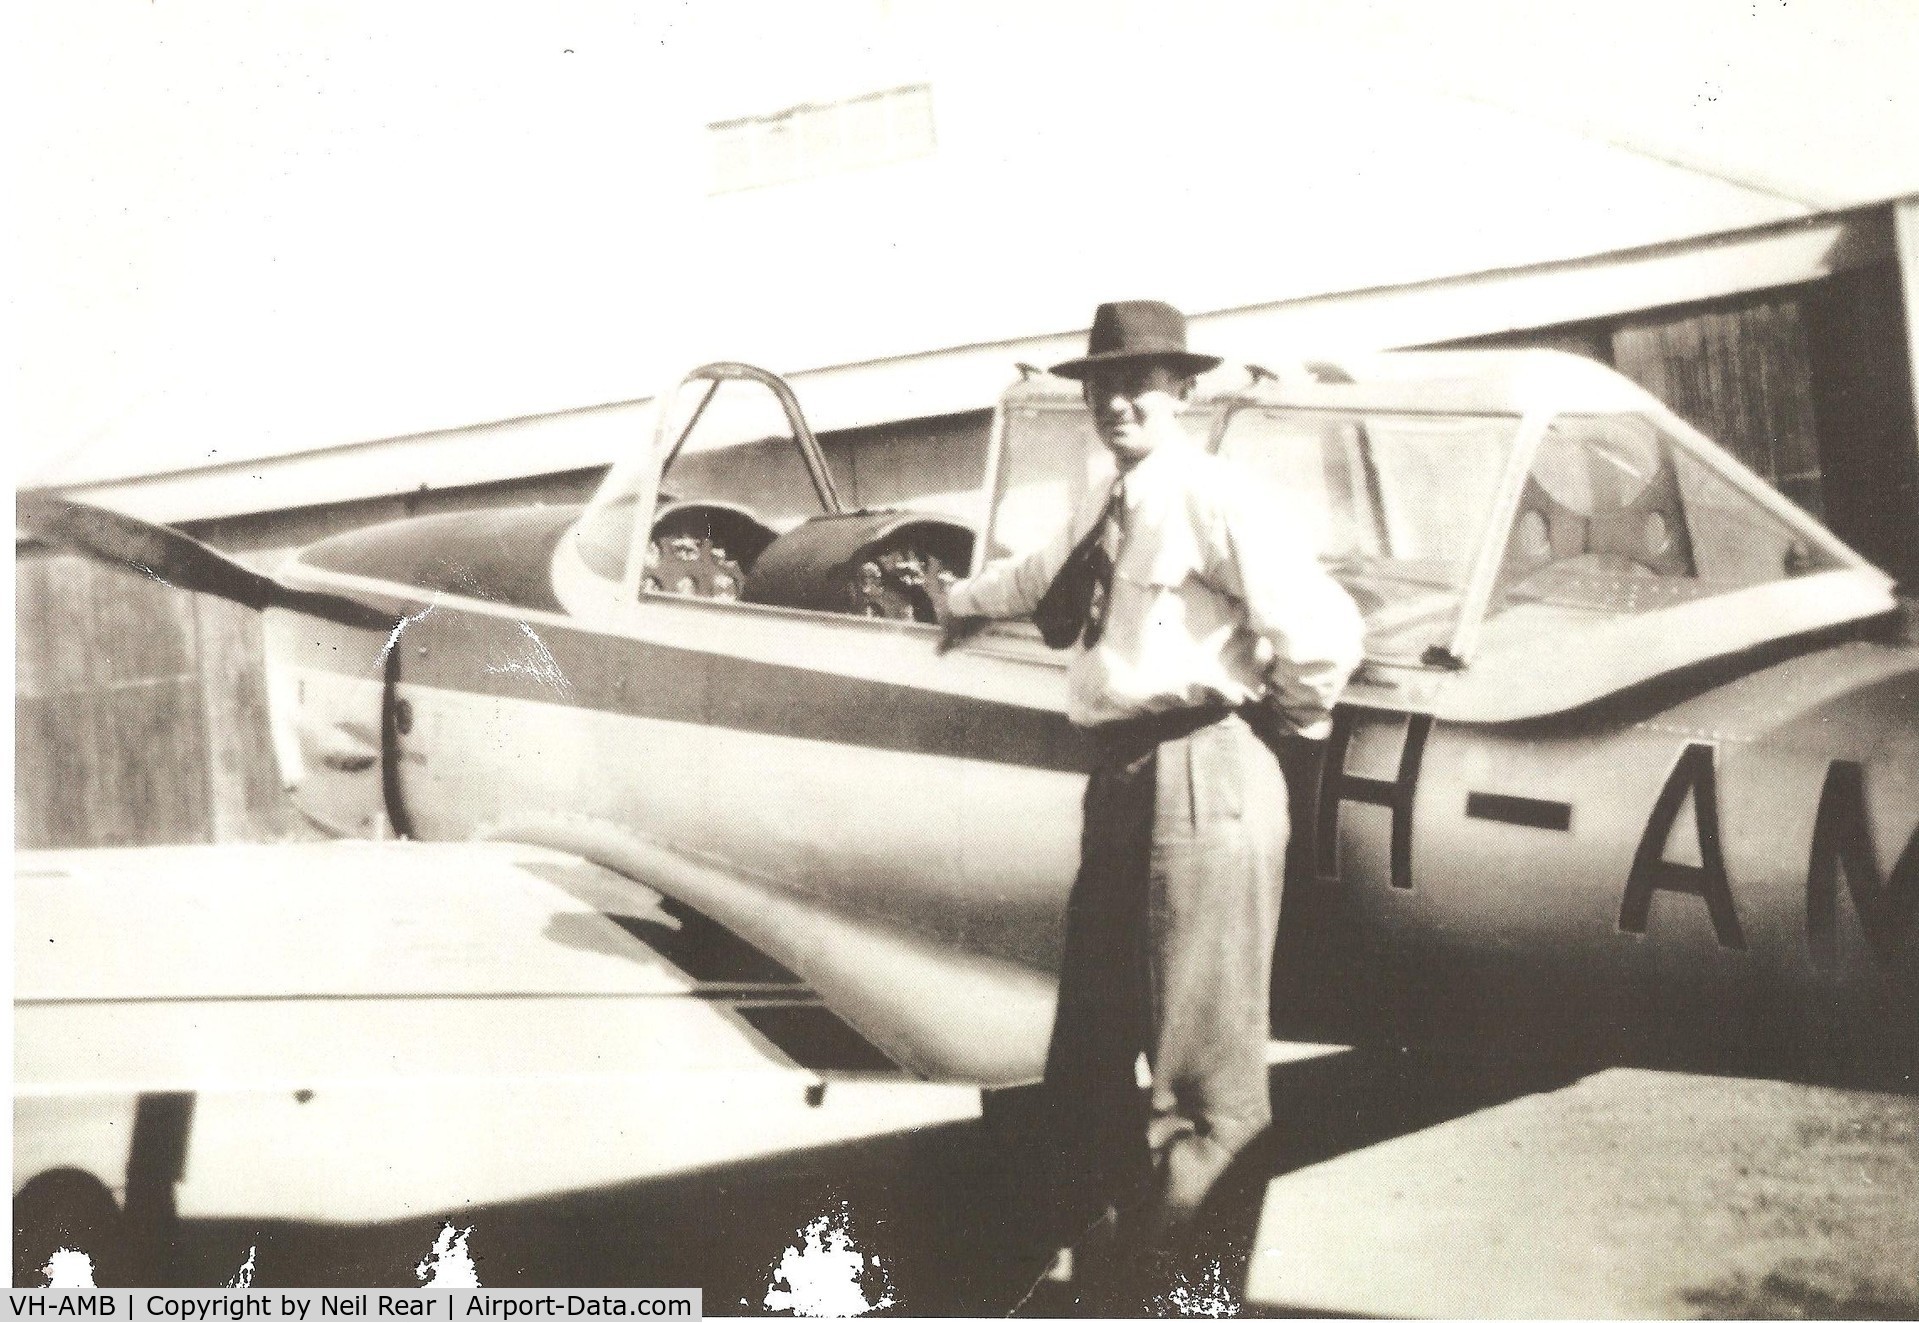 VH-AMB, 1950 De Havilland DHC-1 Chipmunk T.10 C/N C1/0174, Taken at Royal Aero Club Guildford Western Australia.date unknown circa 1950s. Person is secretary of club. Photo given to me by N.Rear